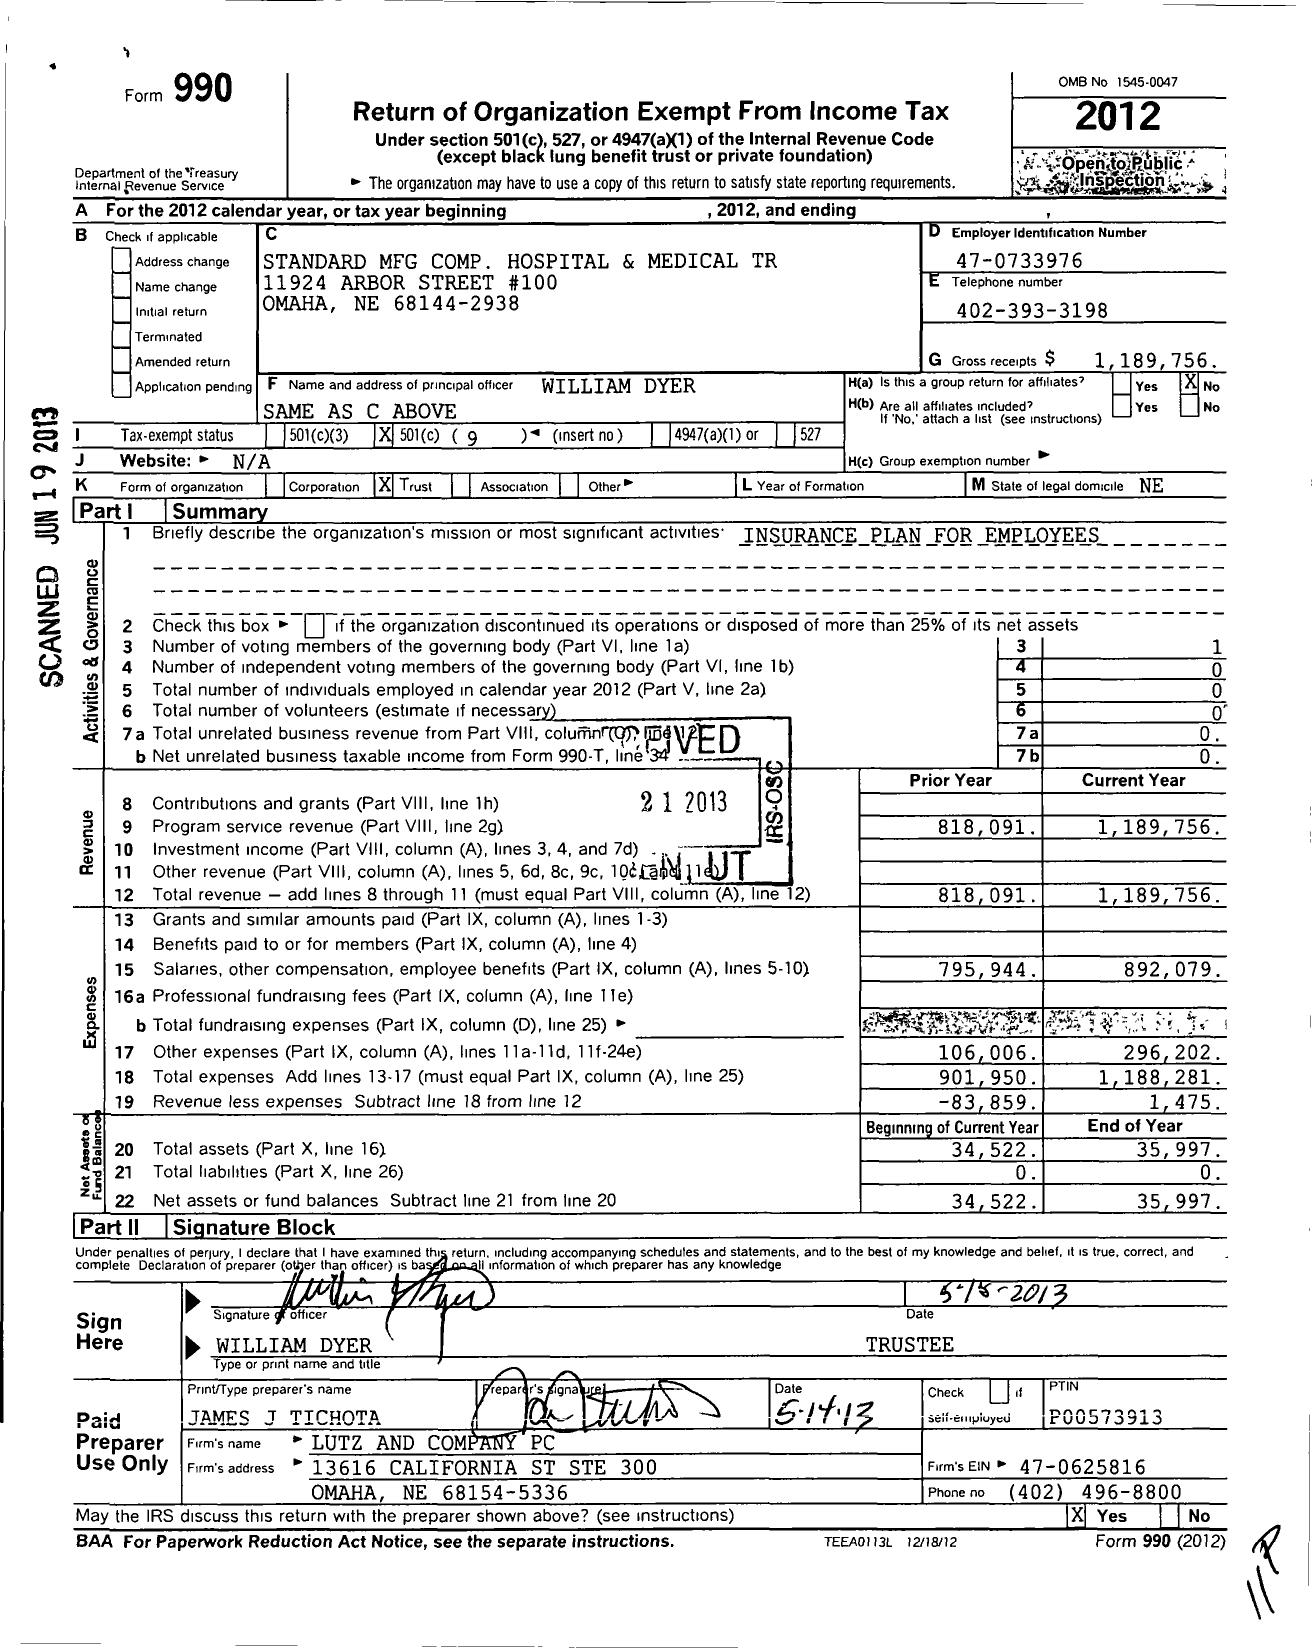 Image of first page of 2012 Form 990O for Standard MFG Comp Hospital and Medical Trust